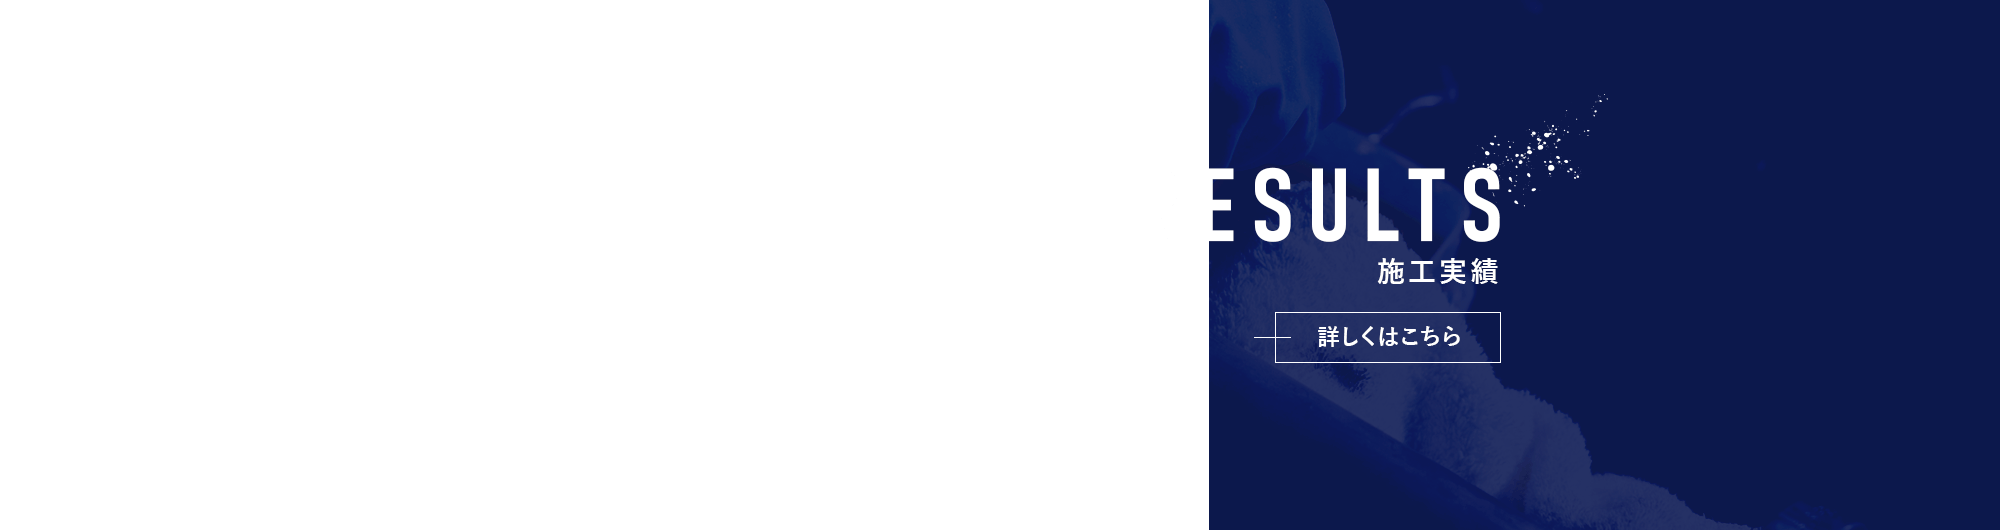 results_banner